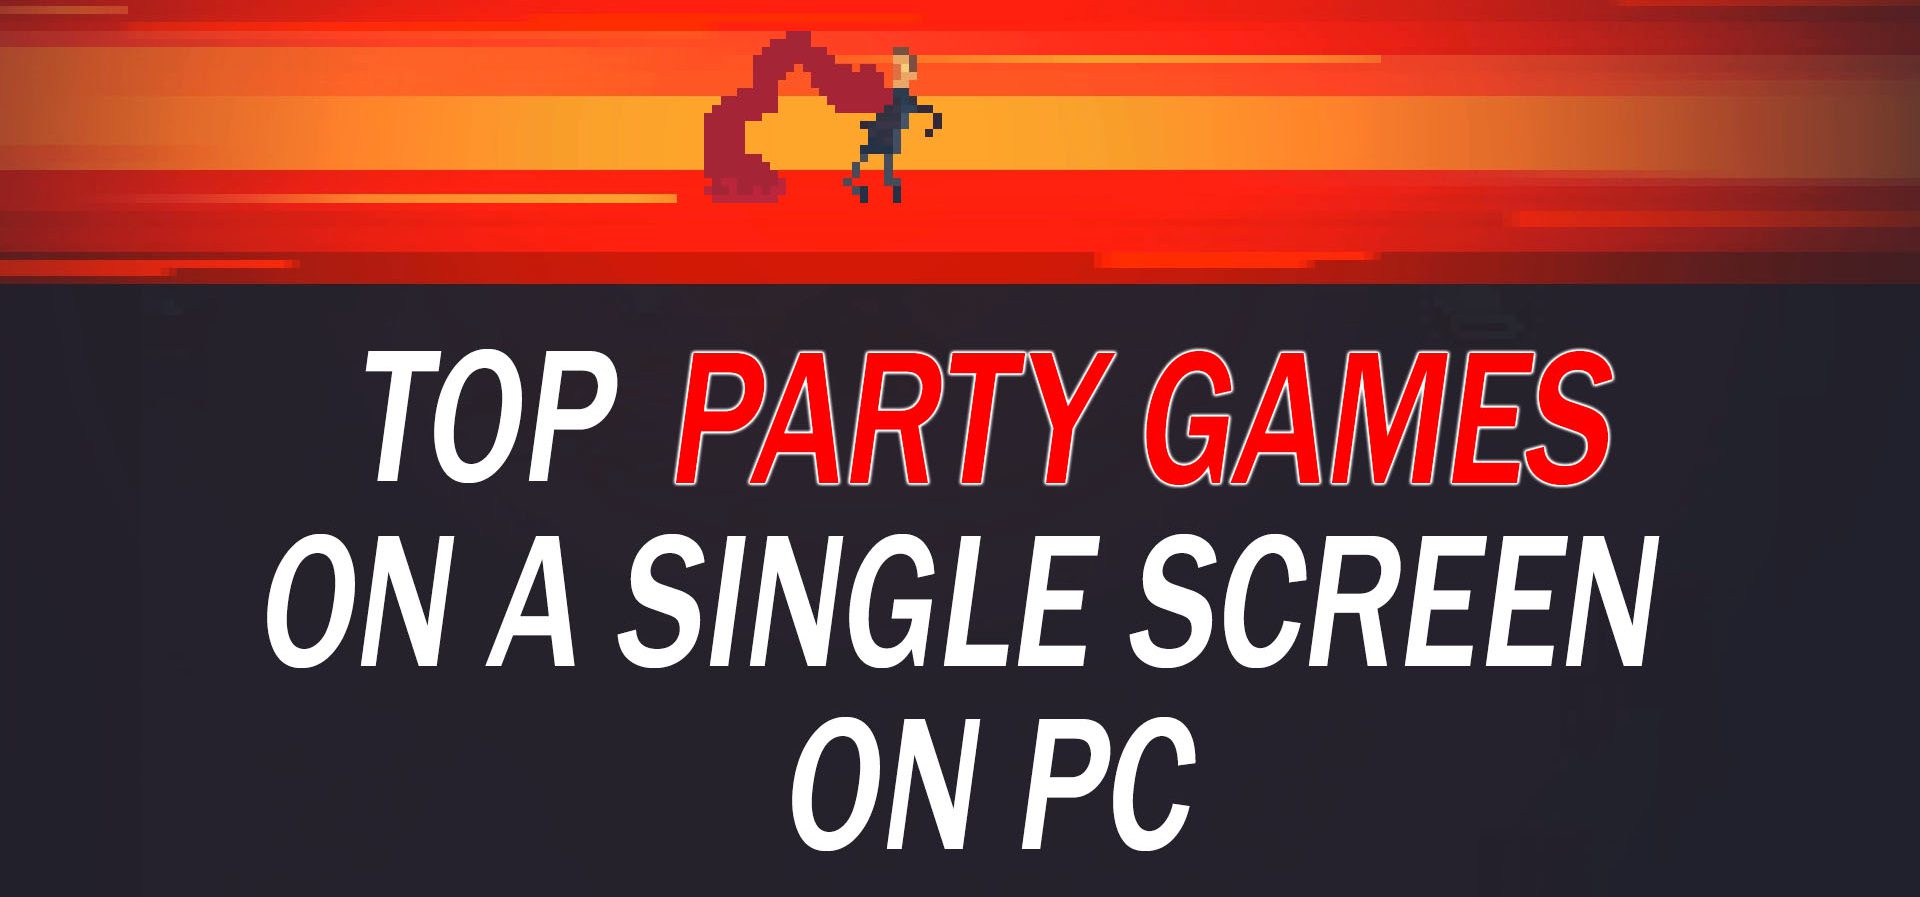 Collection/list of the best party games on a single screen on PC